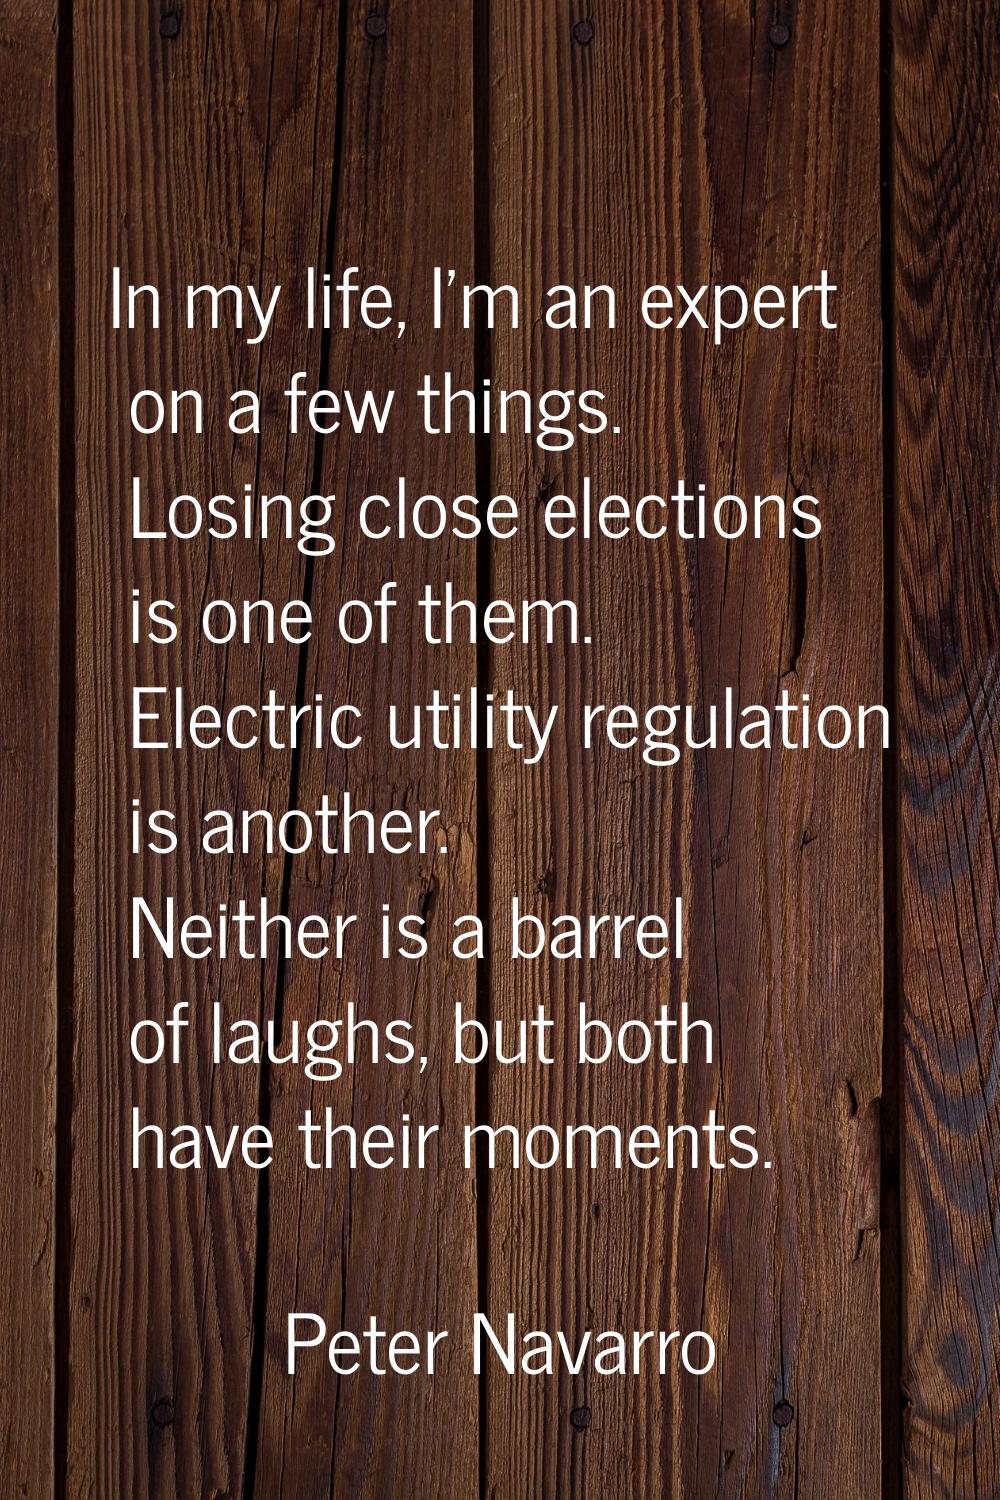 In my life, I'm an expert on a few things. Losing close elections is one of them. Electric utility 